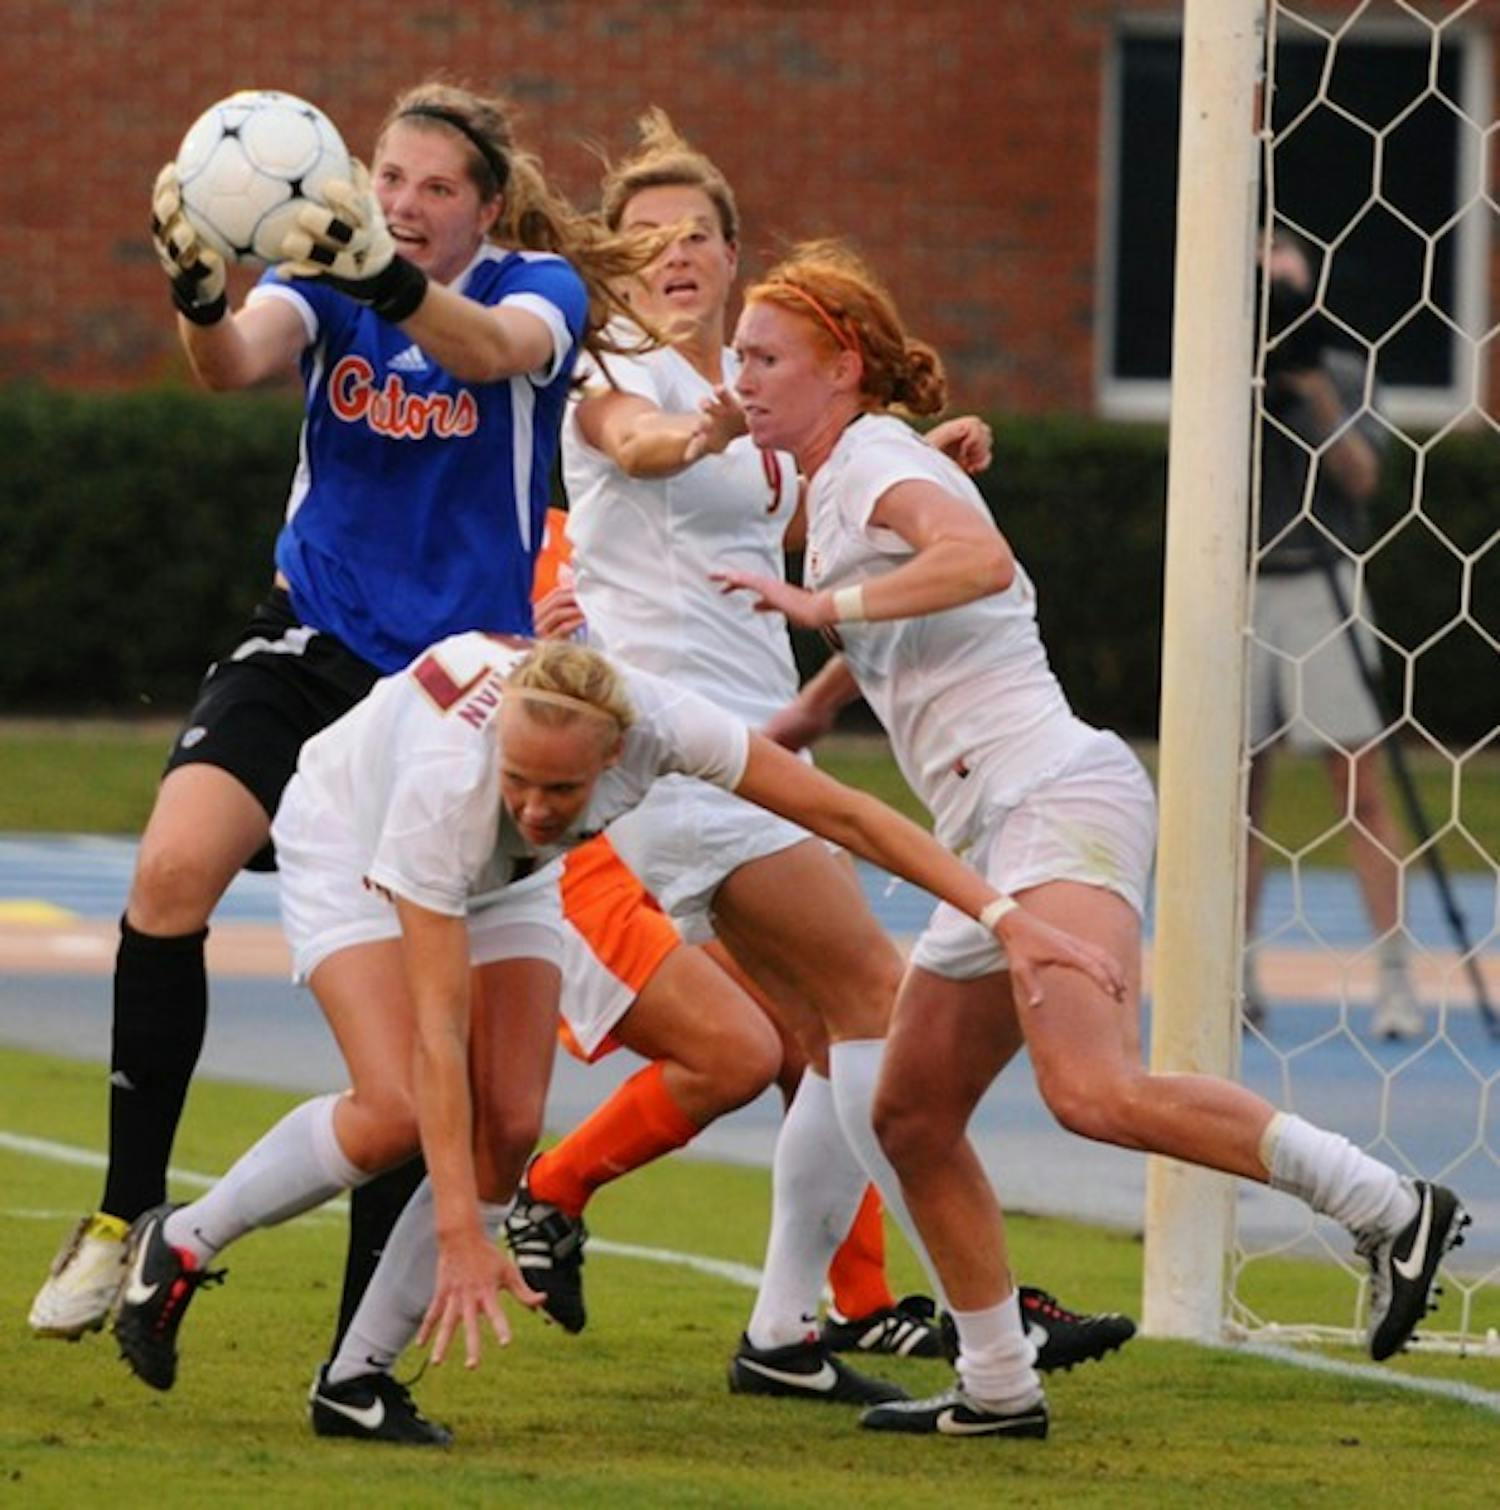 Gators sophomore goalkeeper Taylor Burke makes a save against the Tennessee Volunteers during a game in 2011. Burke played the second half in Florida's 3-0 home loss on FSU on Friday night.